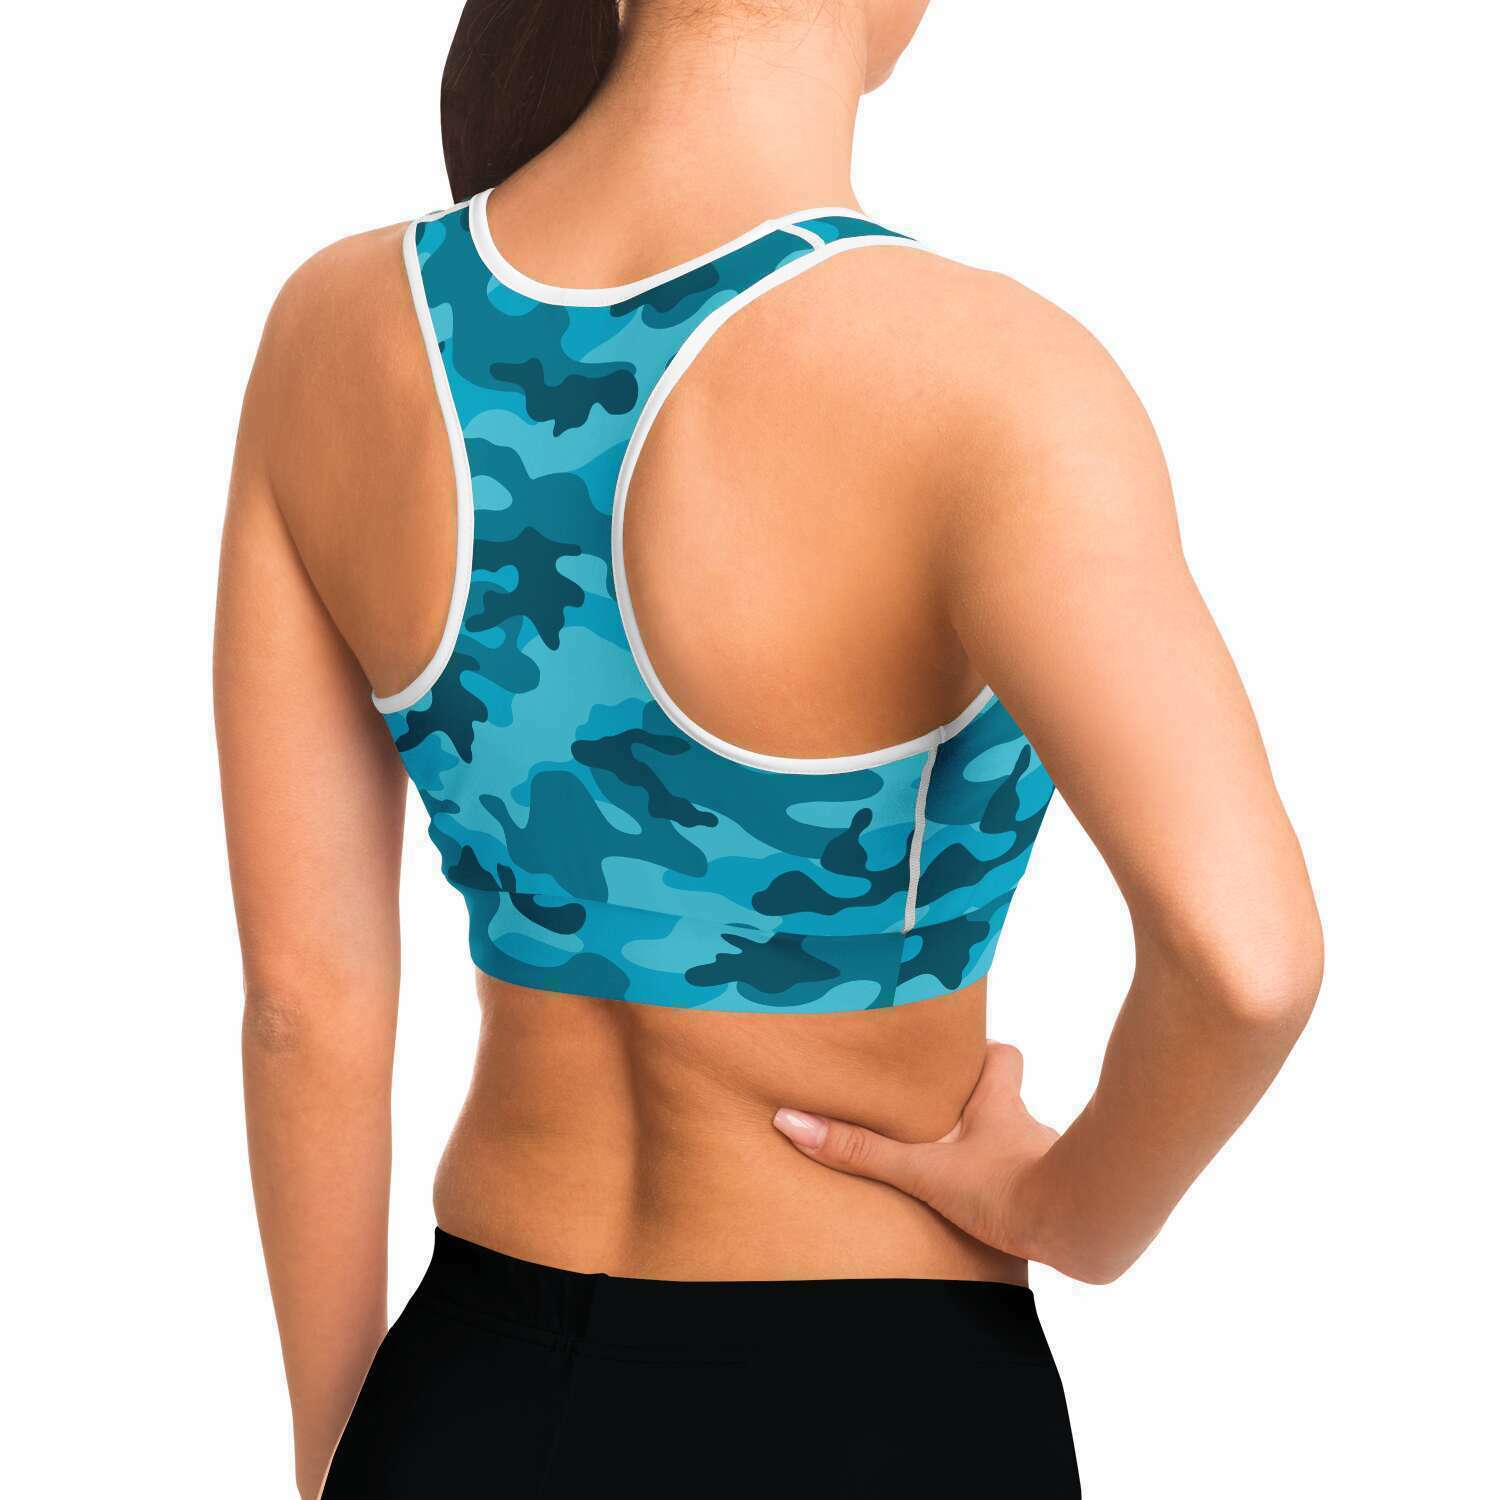 Women's All Cyan Blue Camouflage Athletic Sports Bra Model Right